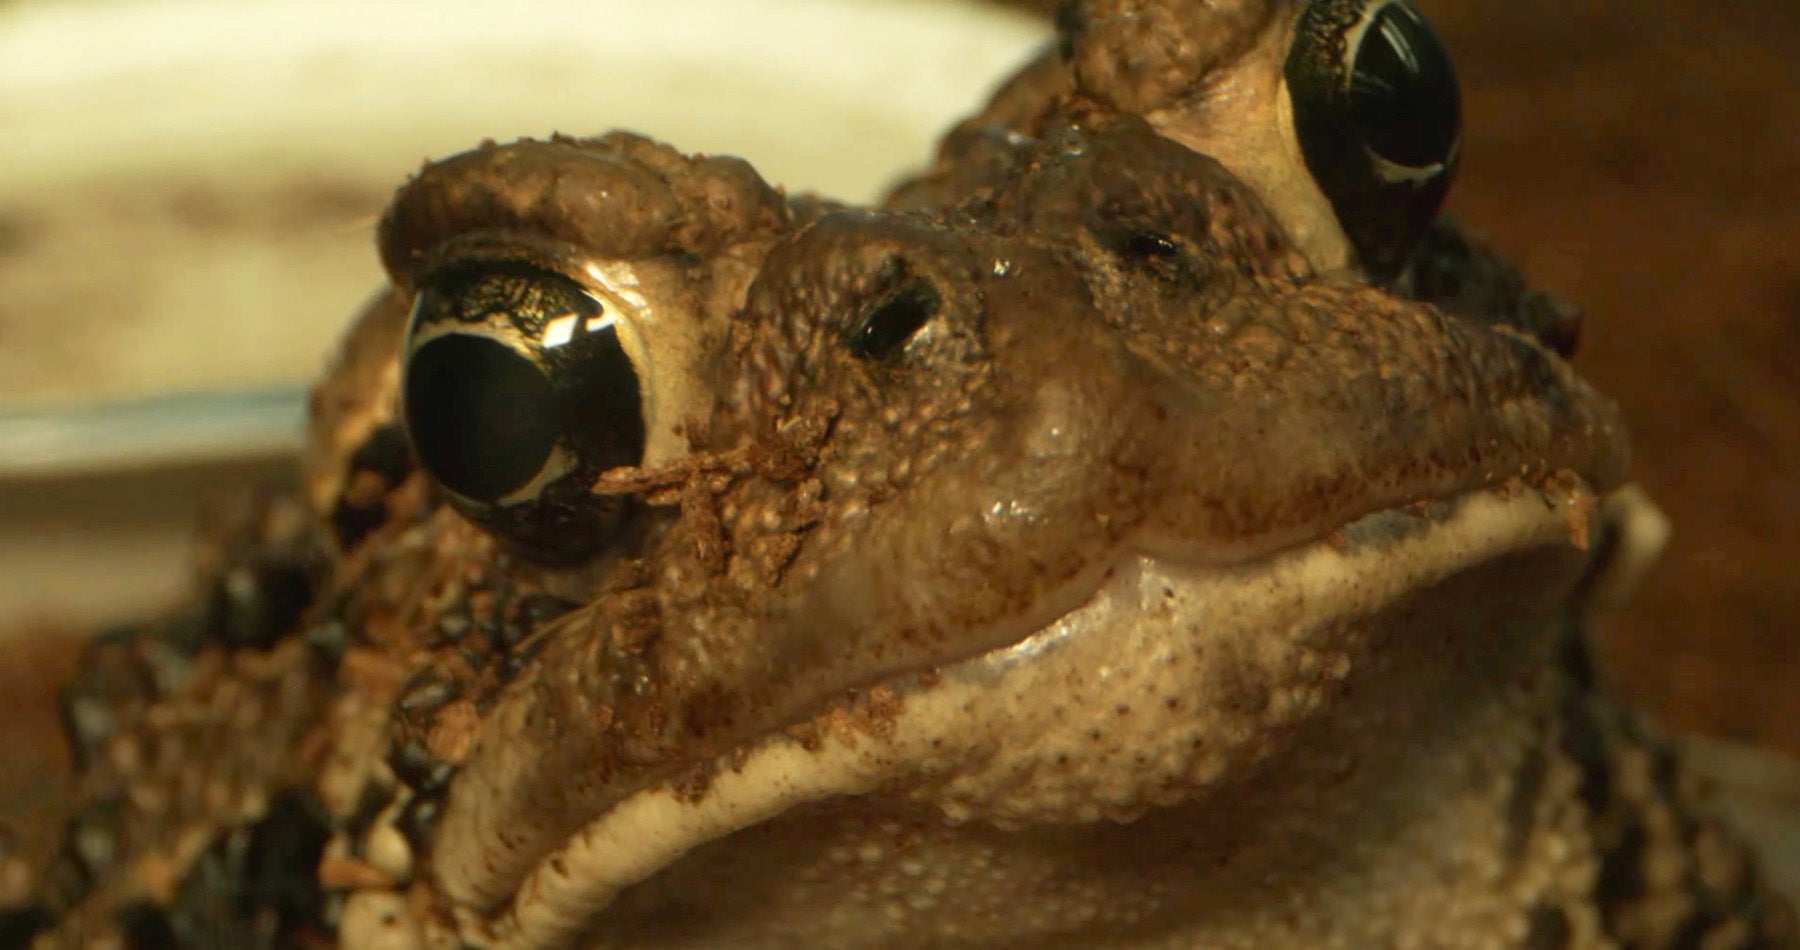 The eyes of a toad